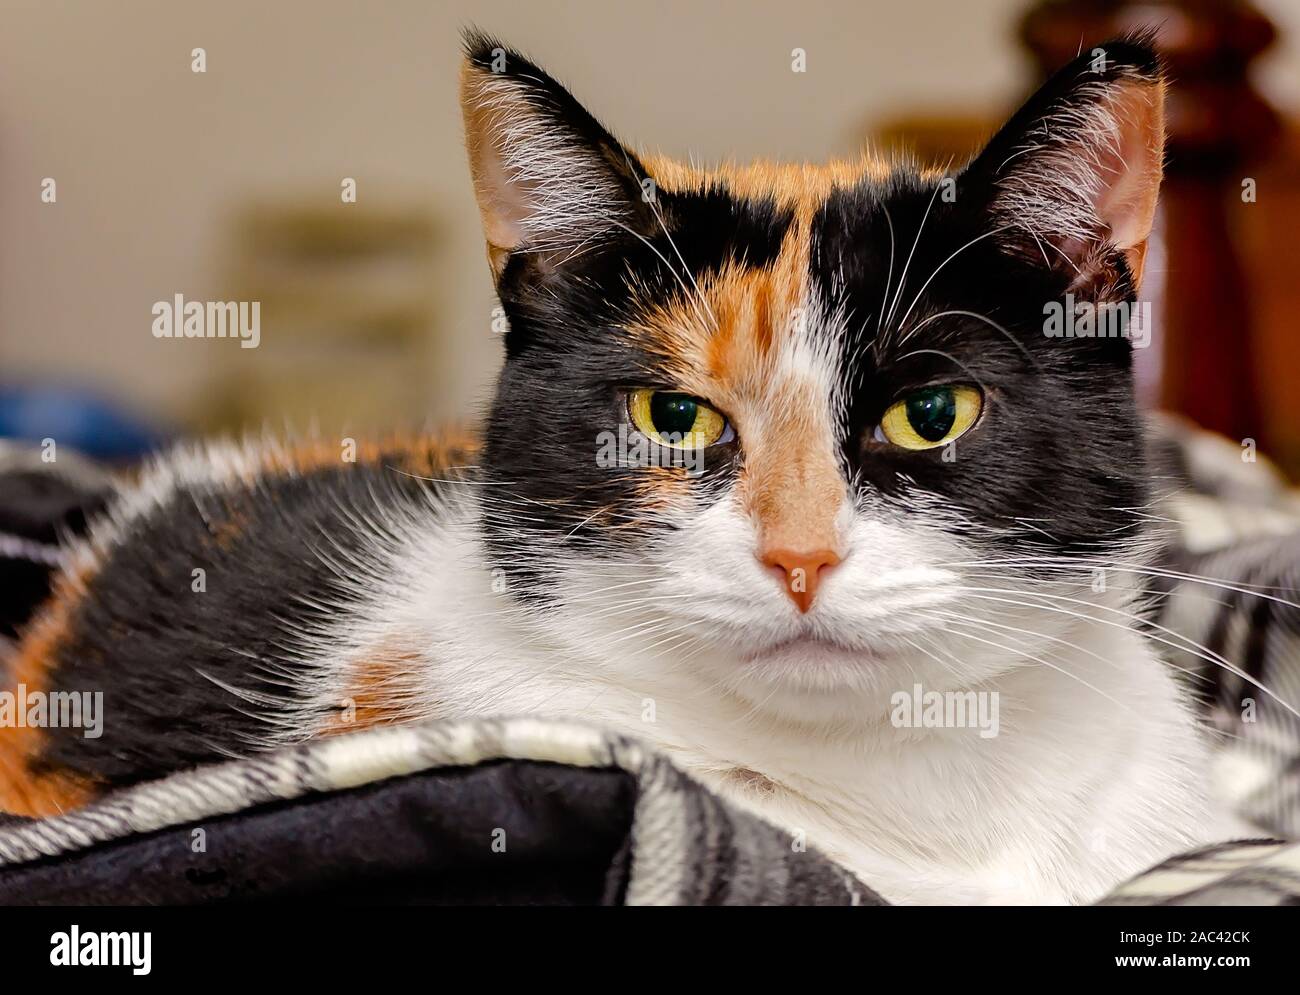 Pumpkin, a four-year-old calico cat, lays on a plaid blanket, Nov. 22, 2019, in Coden, Alabama. Approximately 99. 9 percent of calico cats are female. Stock Photo